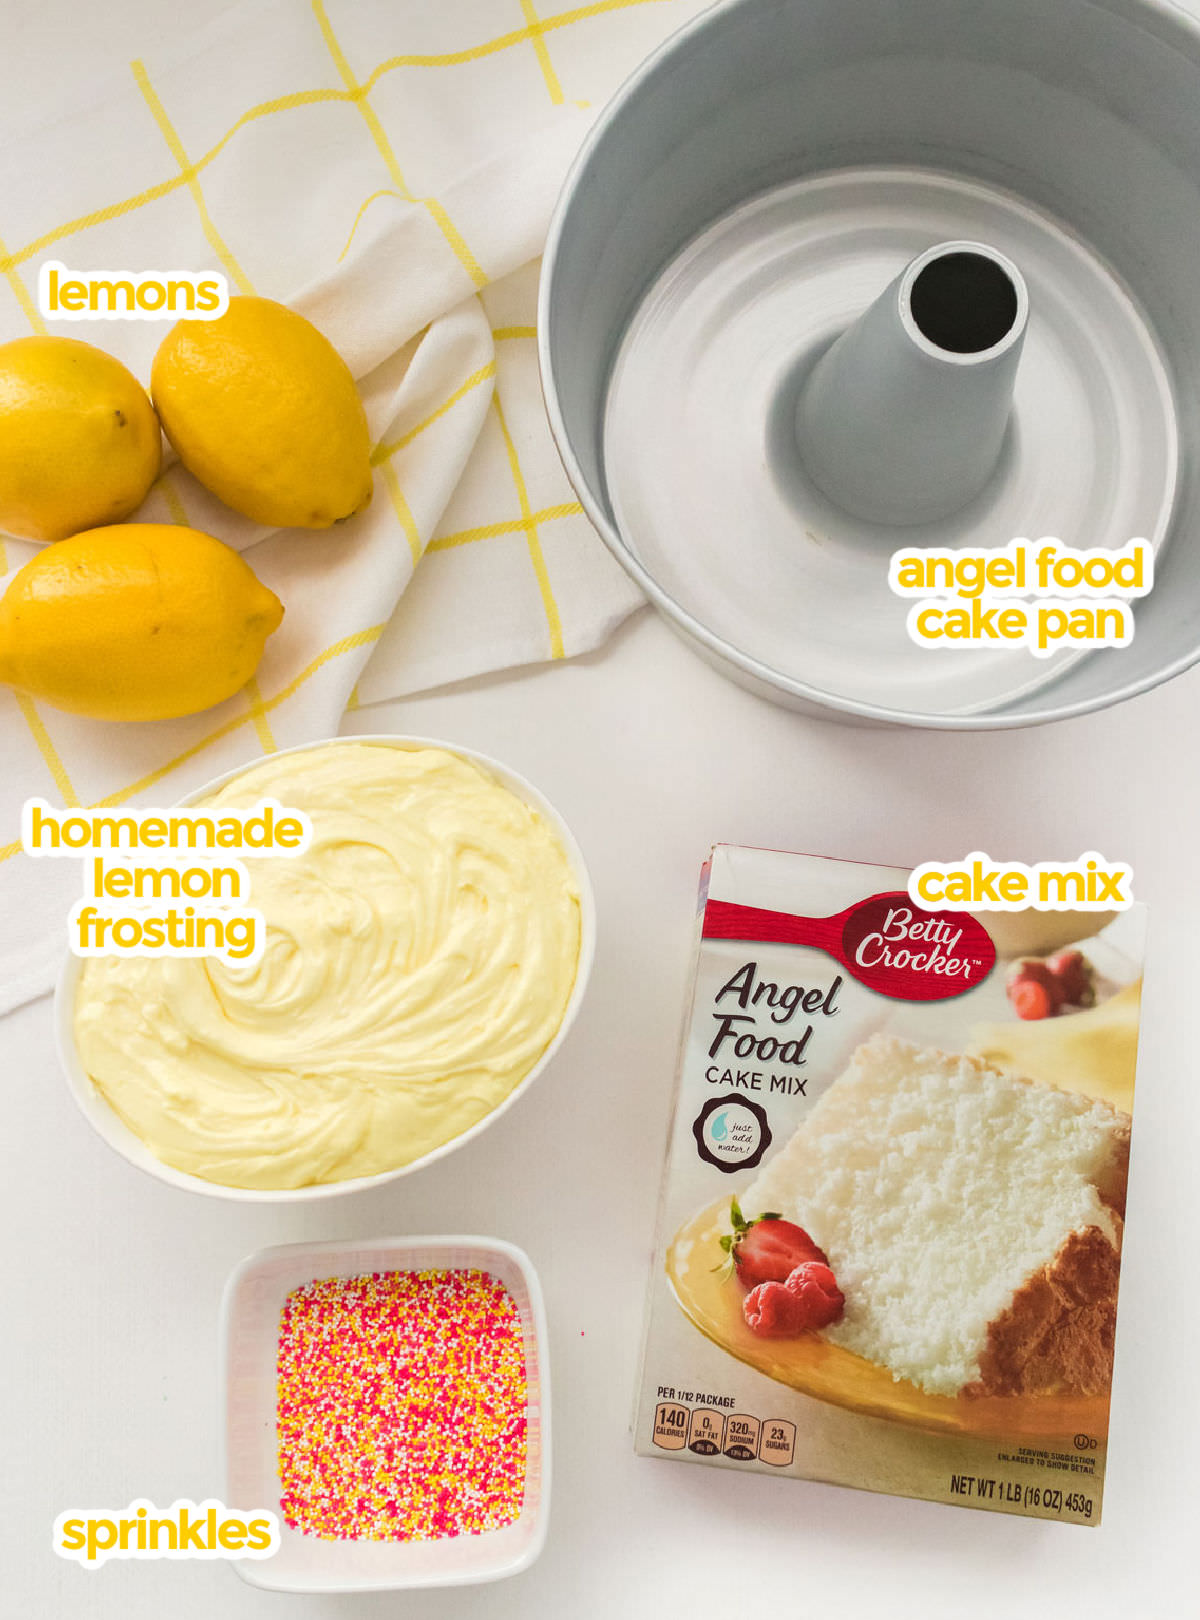 All the ingredients you will need to make Angel Food Cake with Lemon Frosting including an angel food cake pan, Angel Food Cake Mix, Lemon Frosting, lemons and sprinkles.